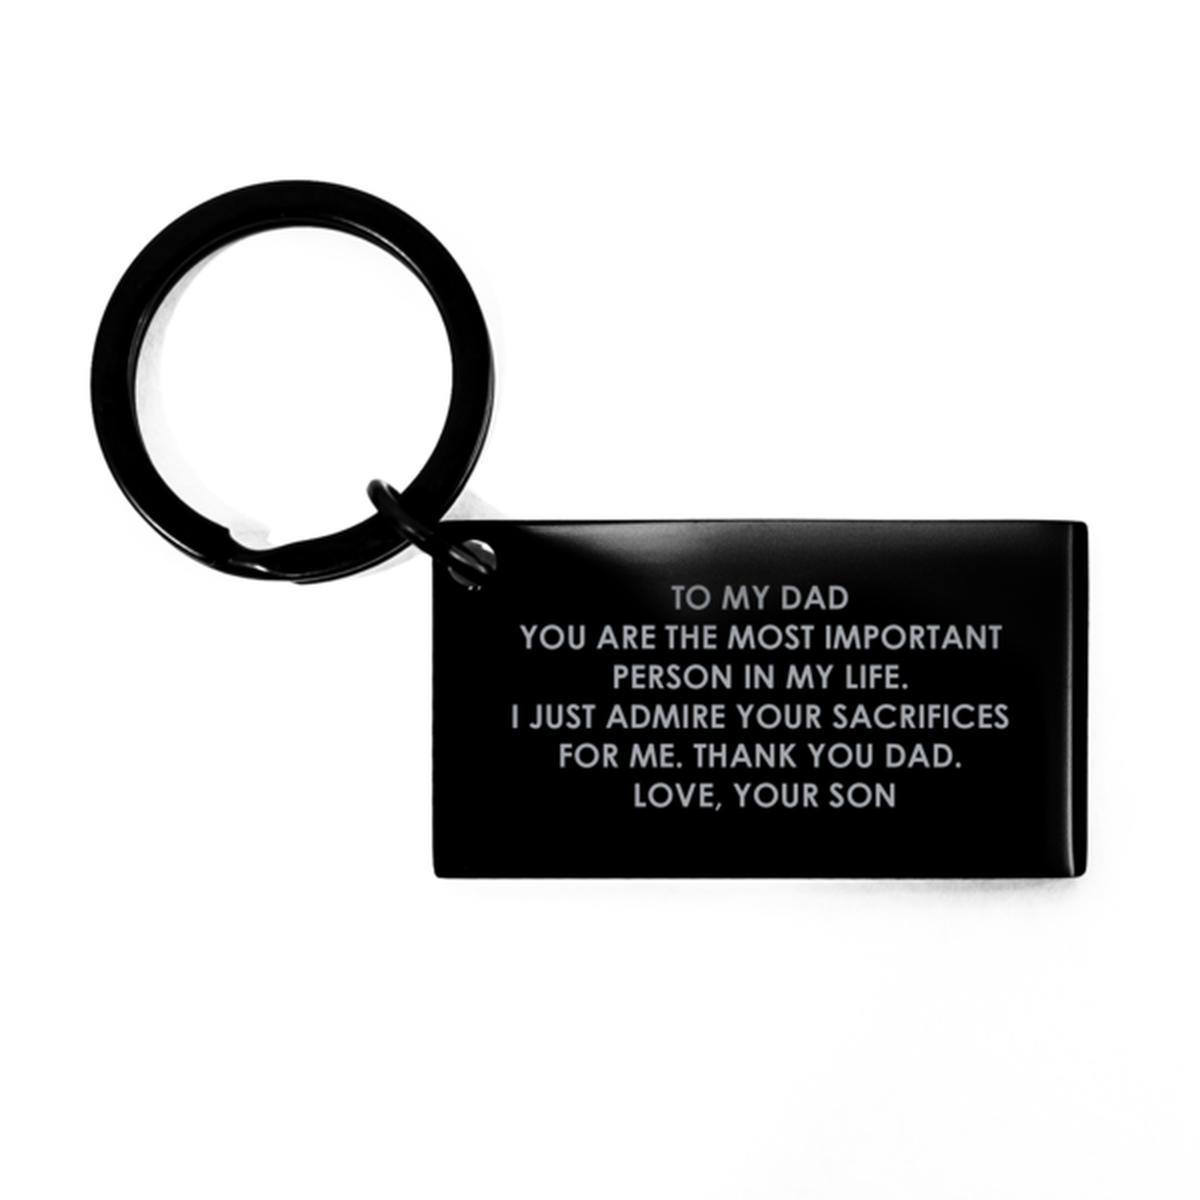 To My Dad Black Keychain, You Are The Most Important Person, Fathers Day Gifts For Dad From Son, Birthday Gifts For Men